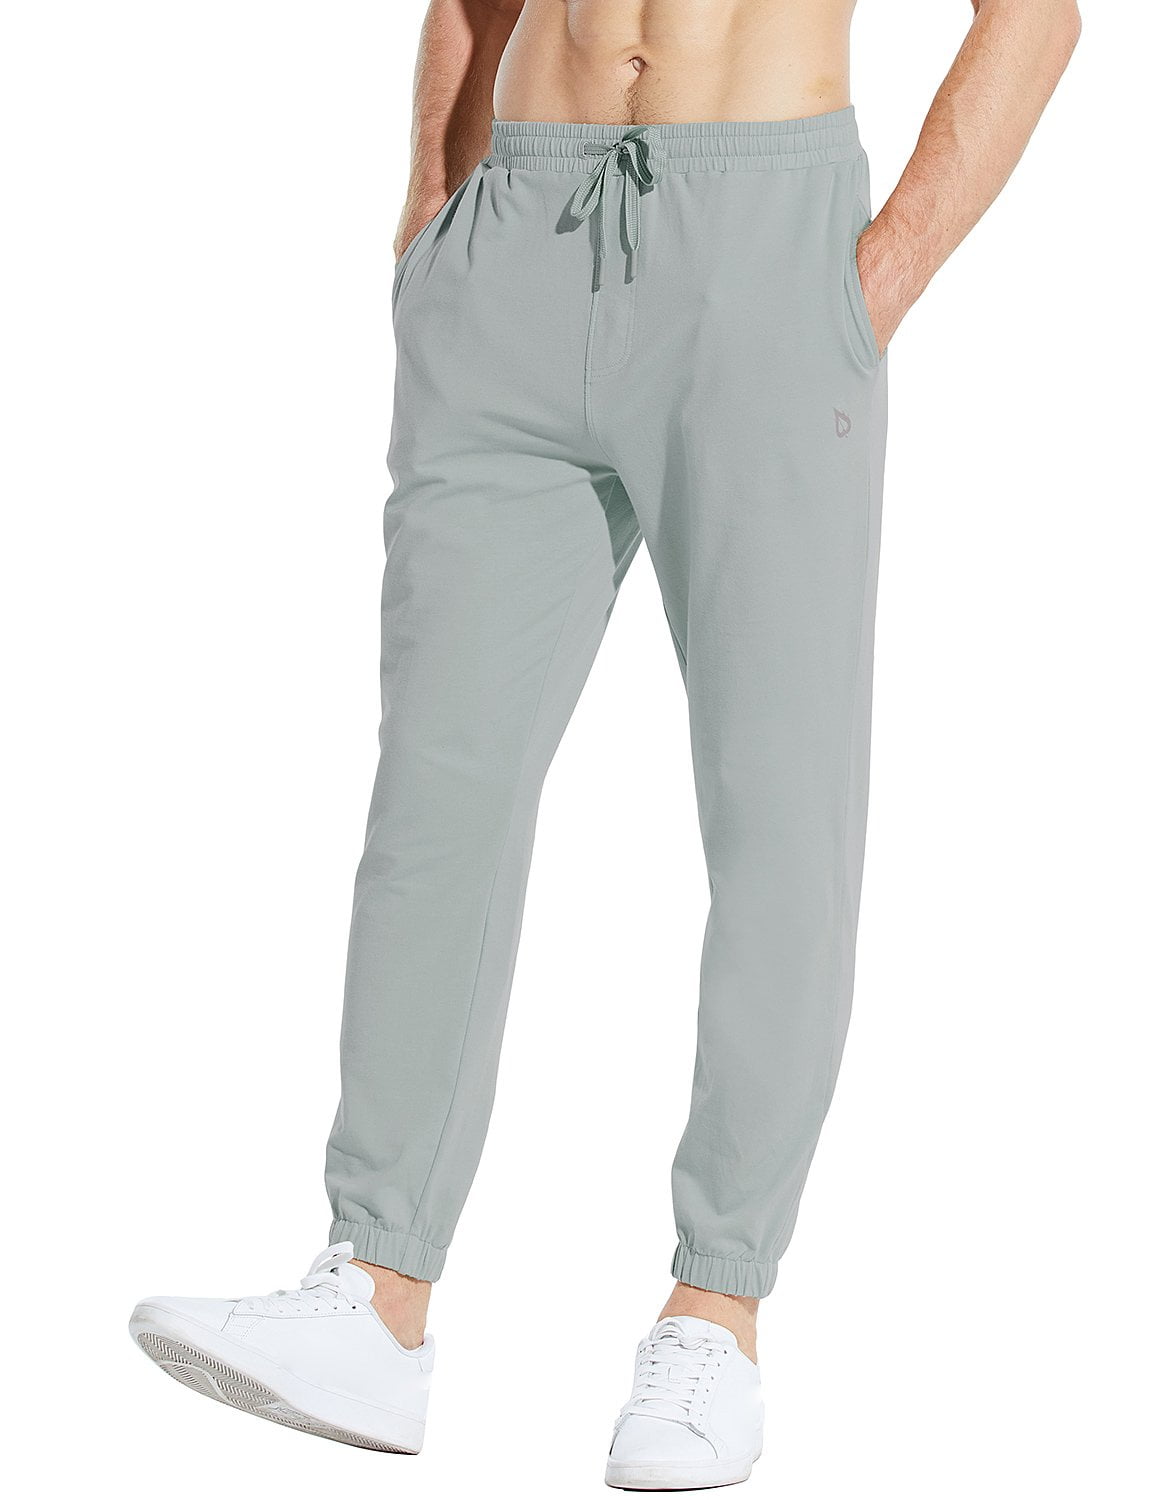 Mens Jogger Sweatpants,Casual Cotton Workout Fitness Elastic Stretchy Bodybuilding Running Pants Lounge Sleep Pajamas 